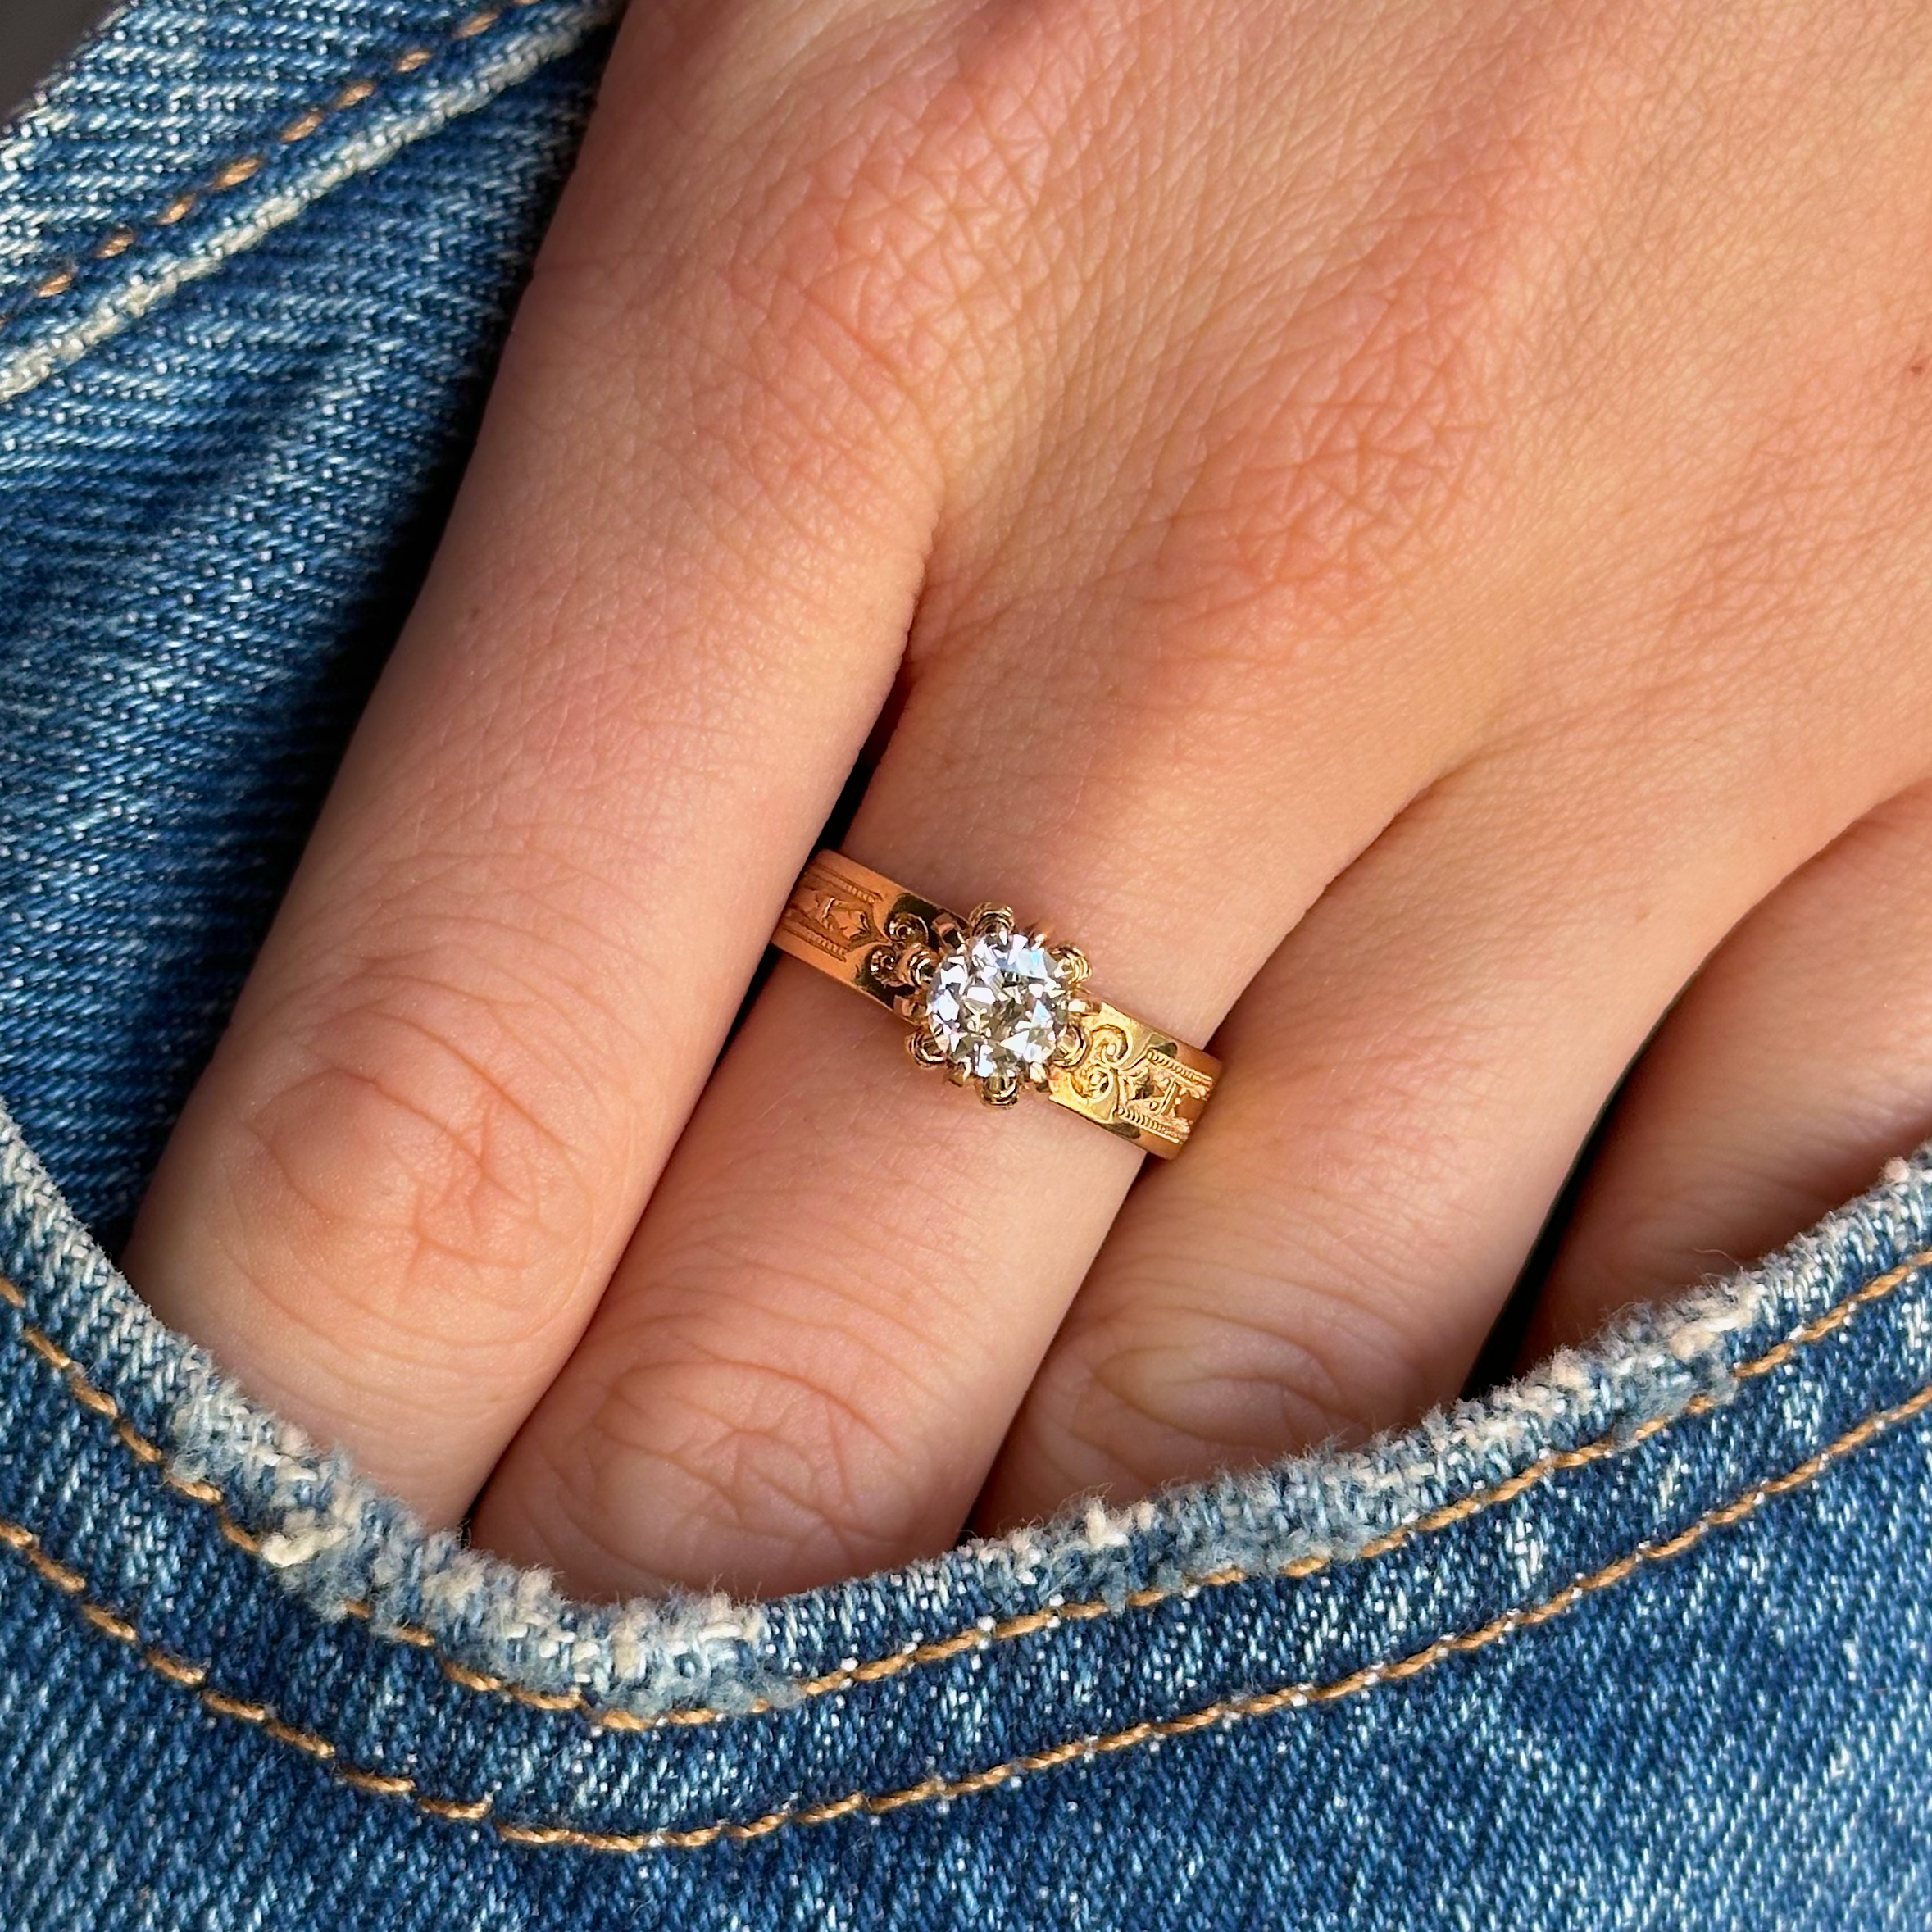 An Antique Dealers Guide to Diamond Vintage Engagement Rings